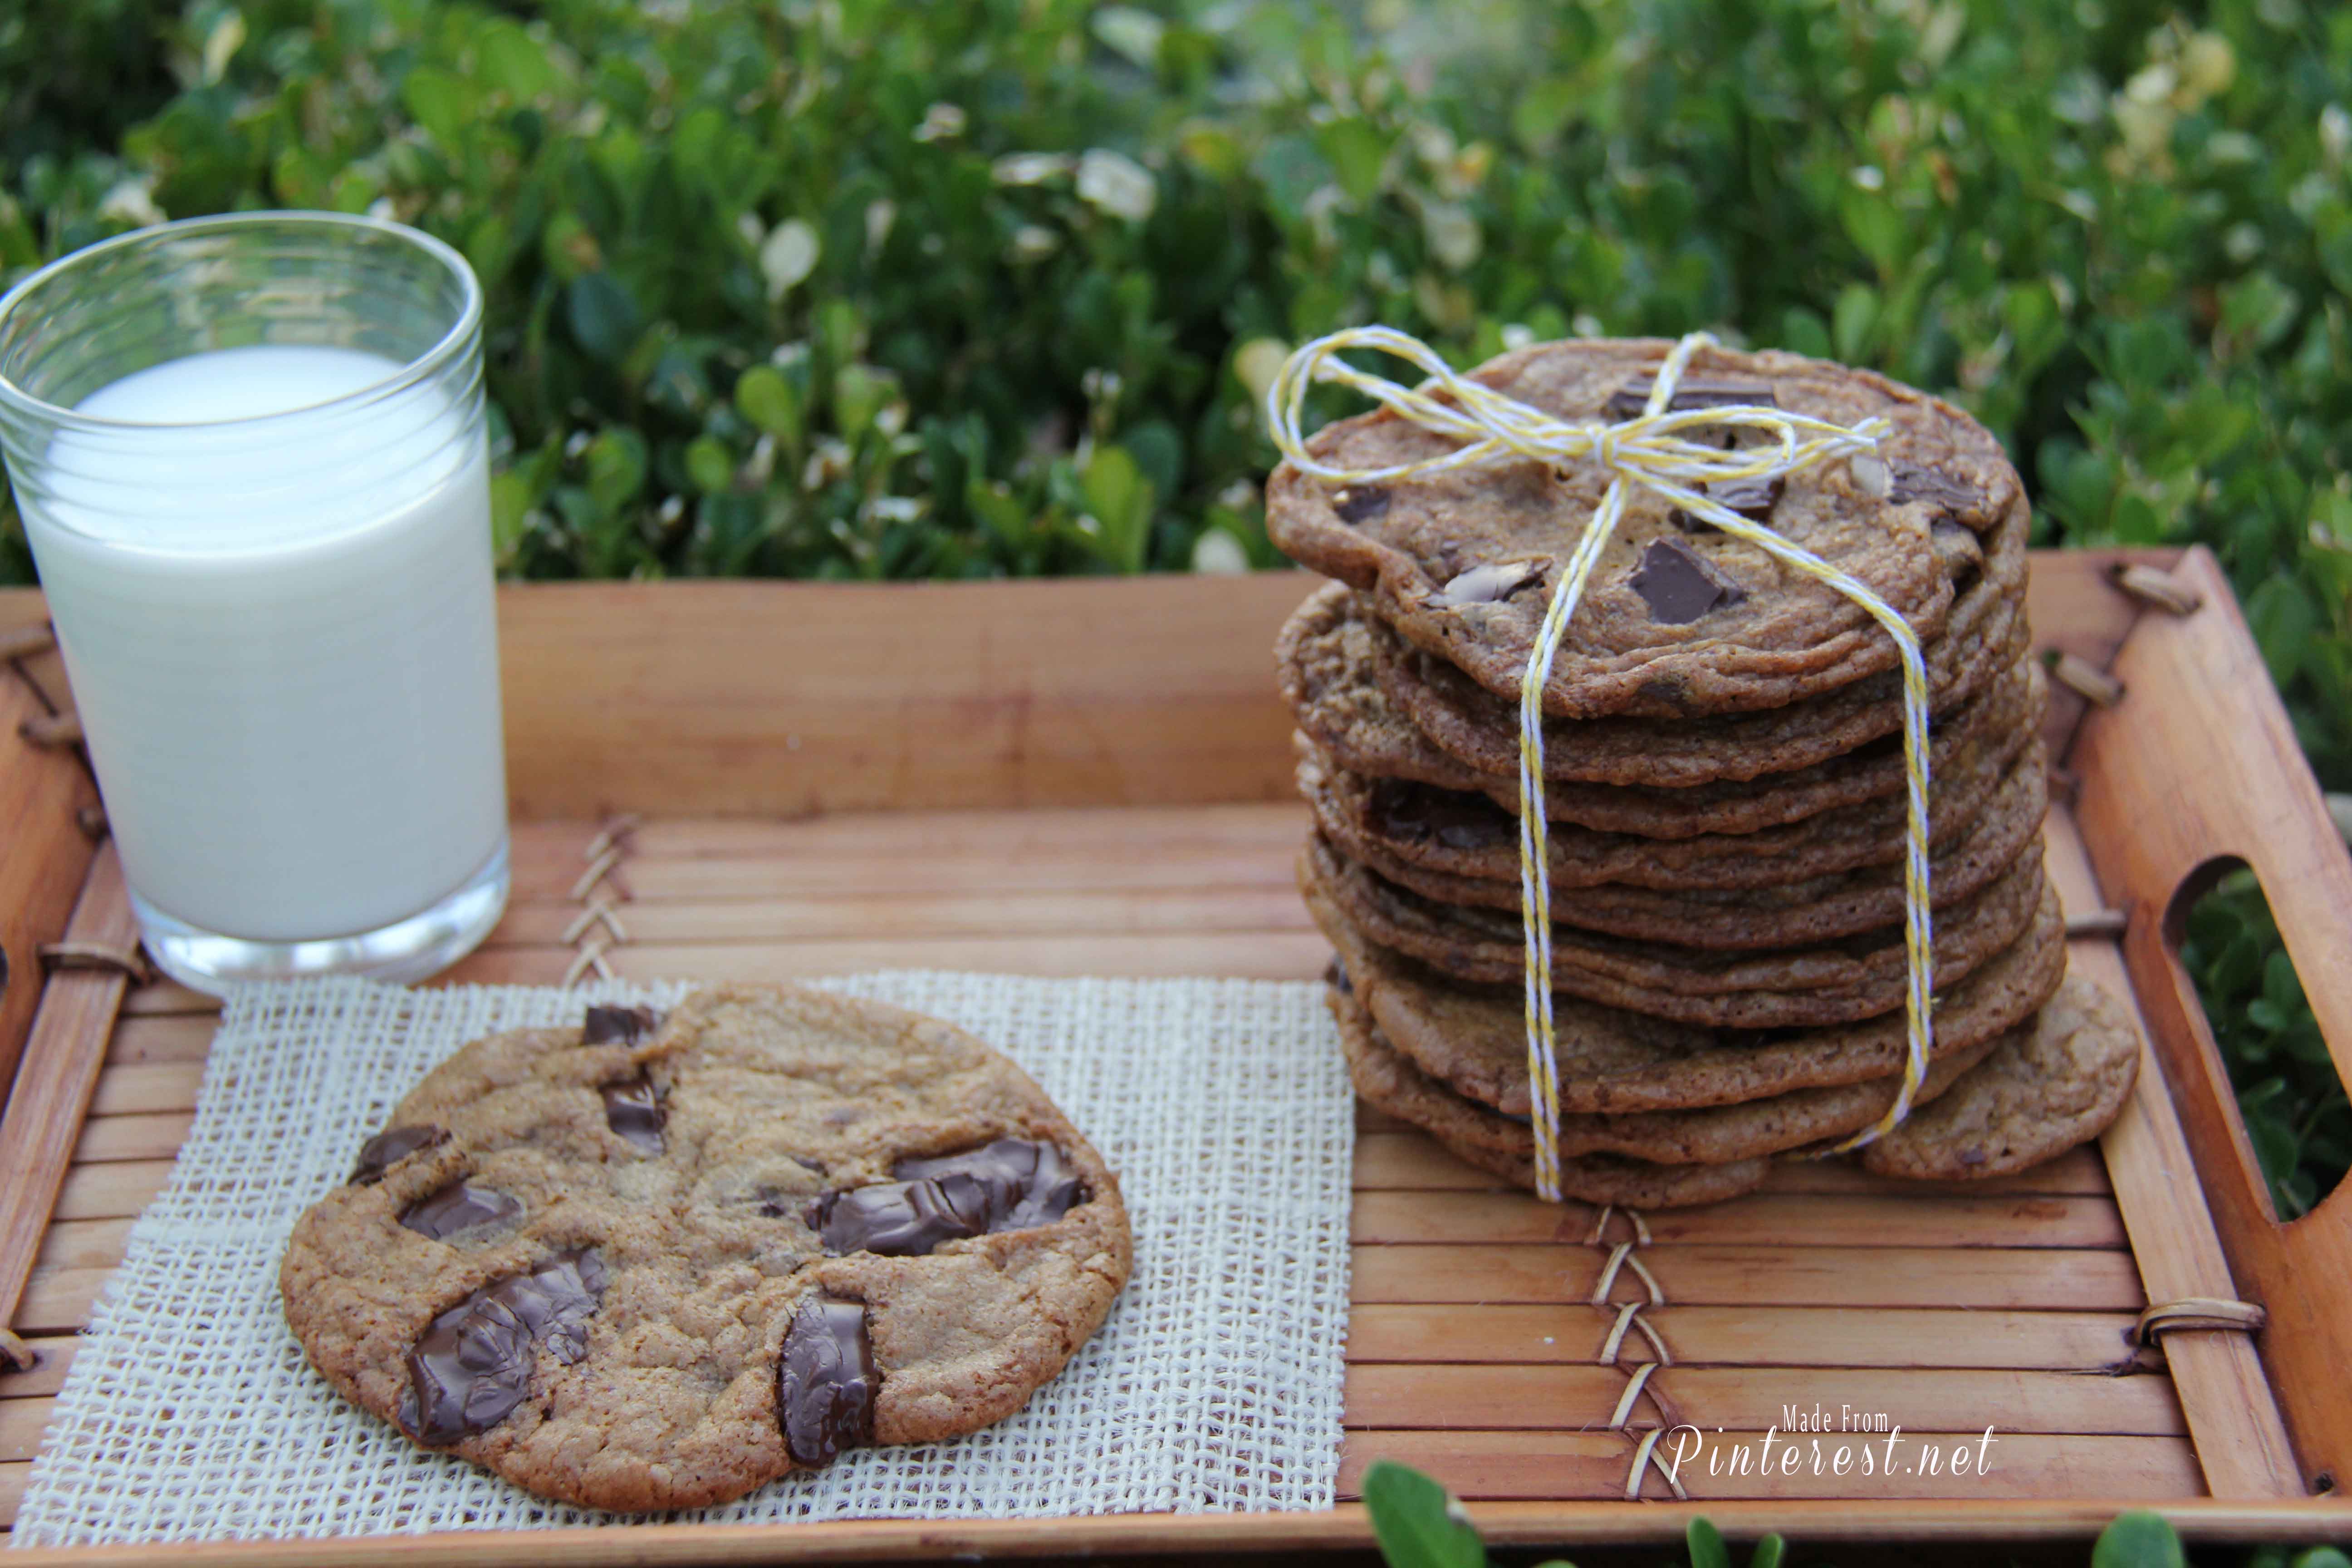 #Gluten Free #Chocolate Chunk #Cookies - I finally found THE ULTIMATE gluten free cookie recipe! These are totally amazing!